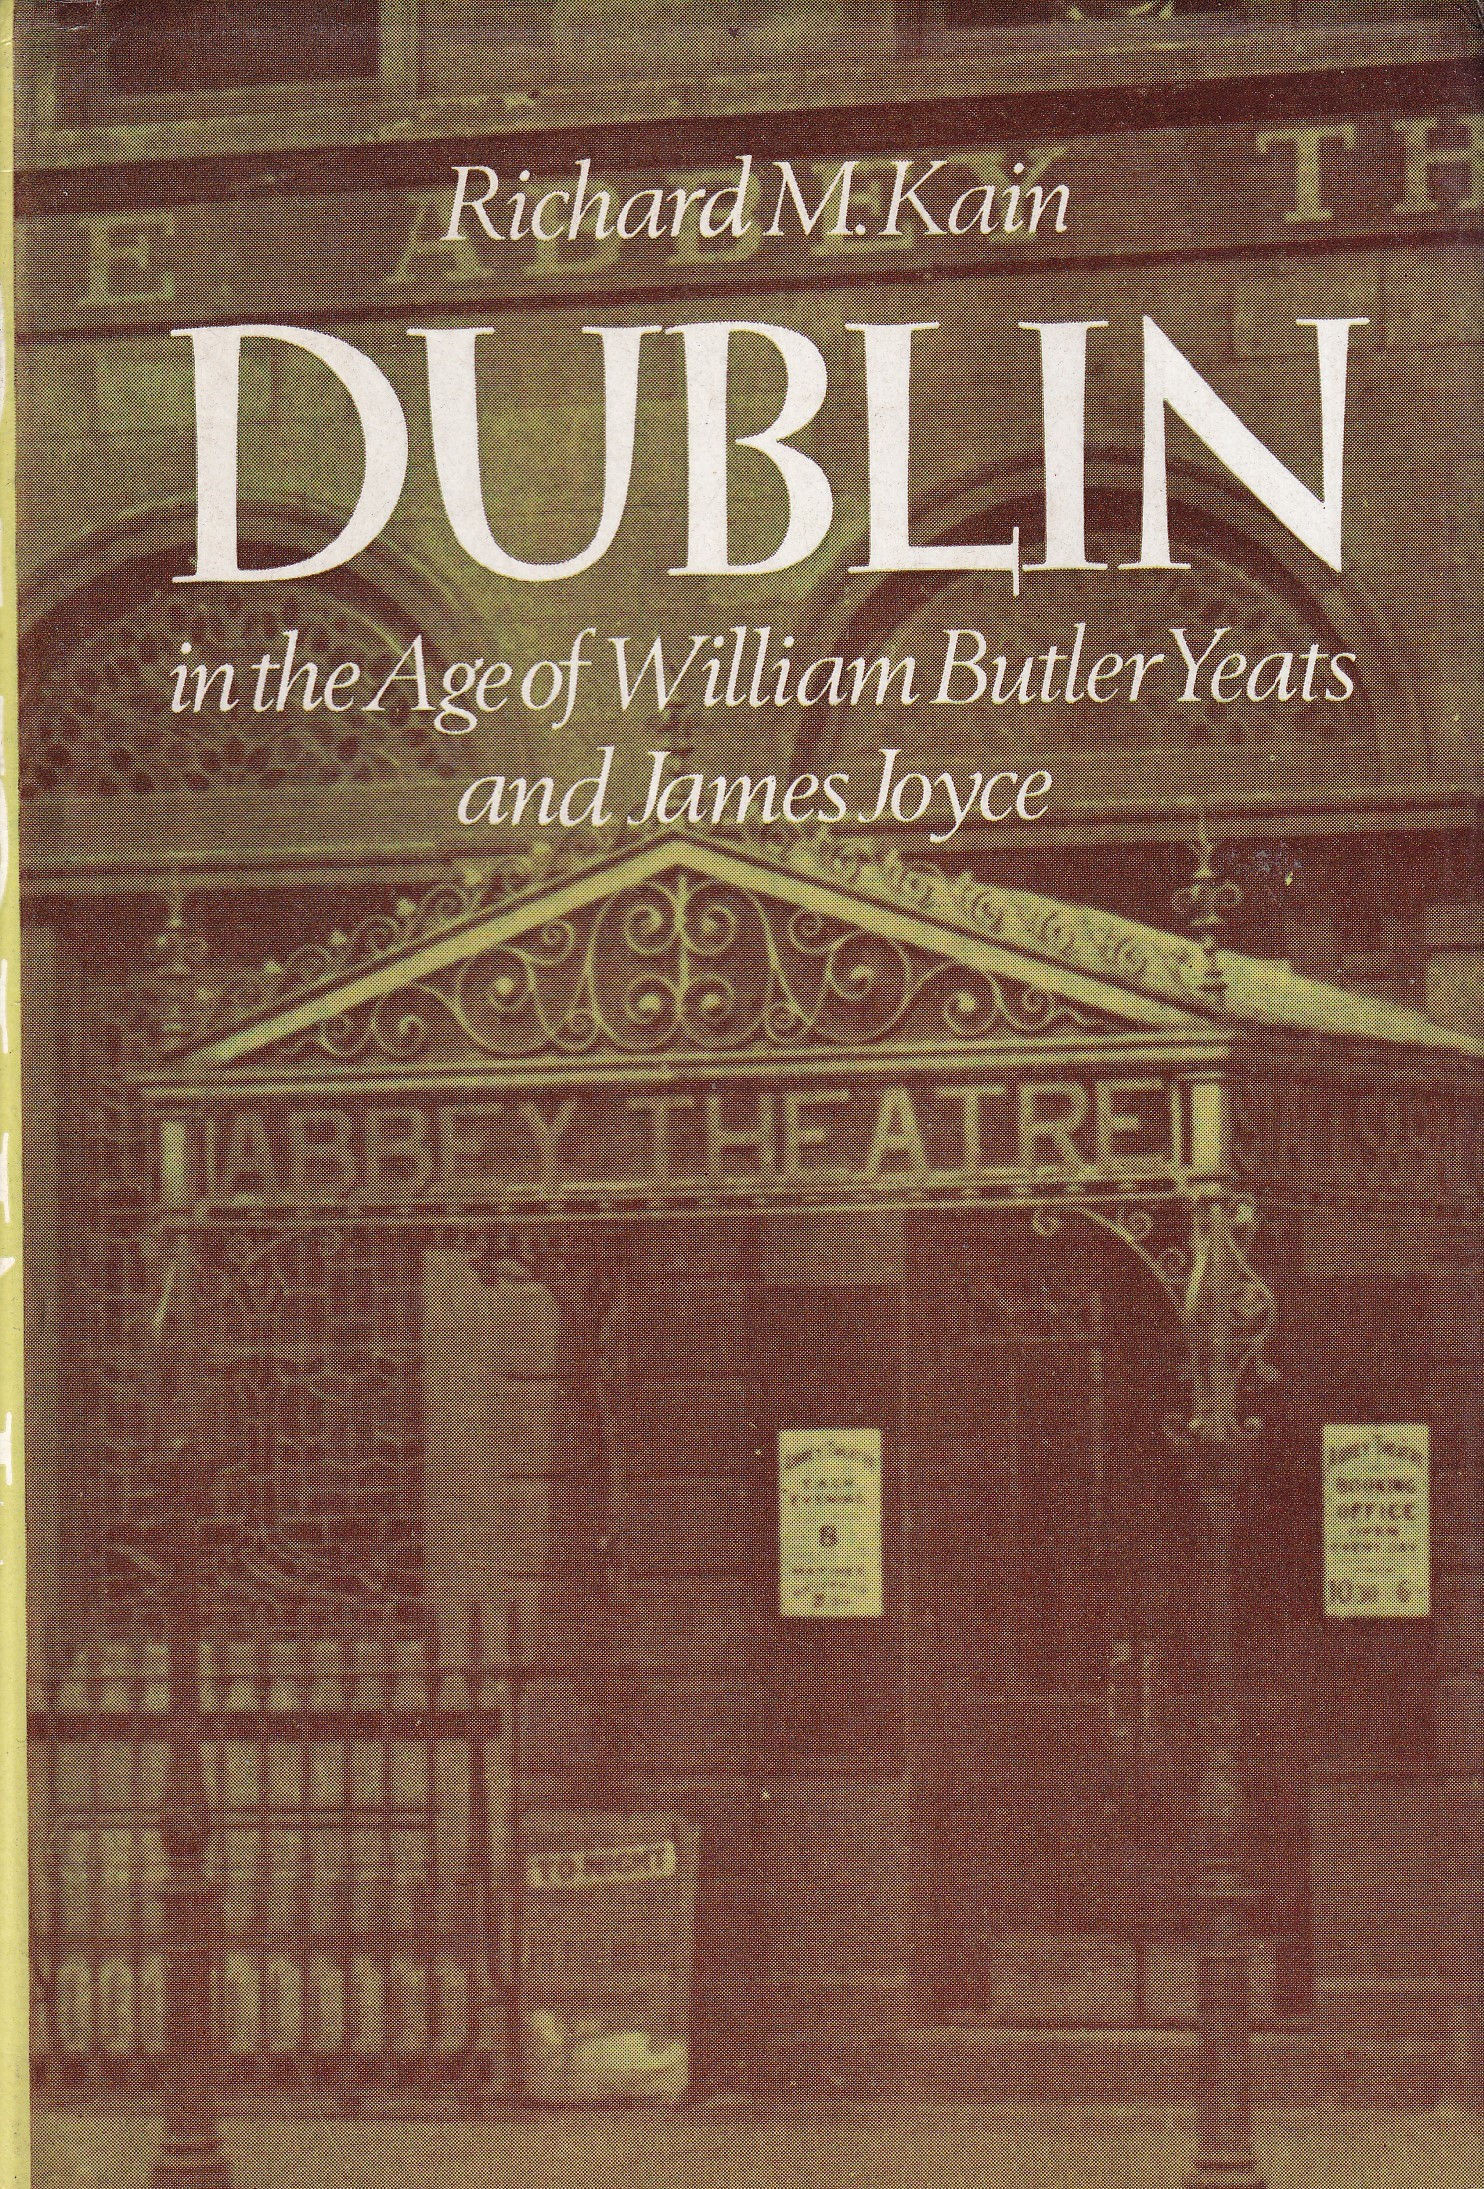 Dublin in the Age of William Butler Yeats and James Joyce by Richard M. Kain